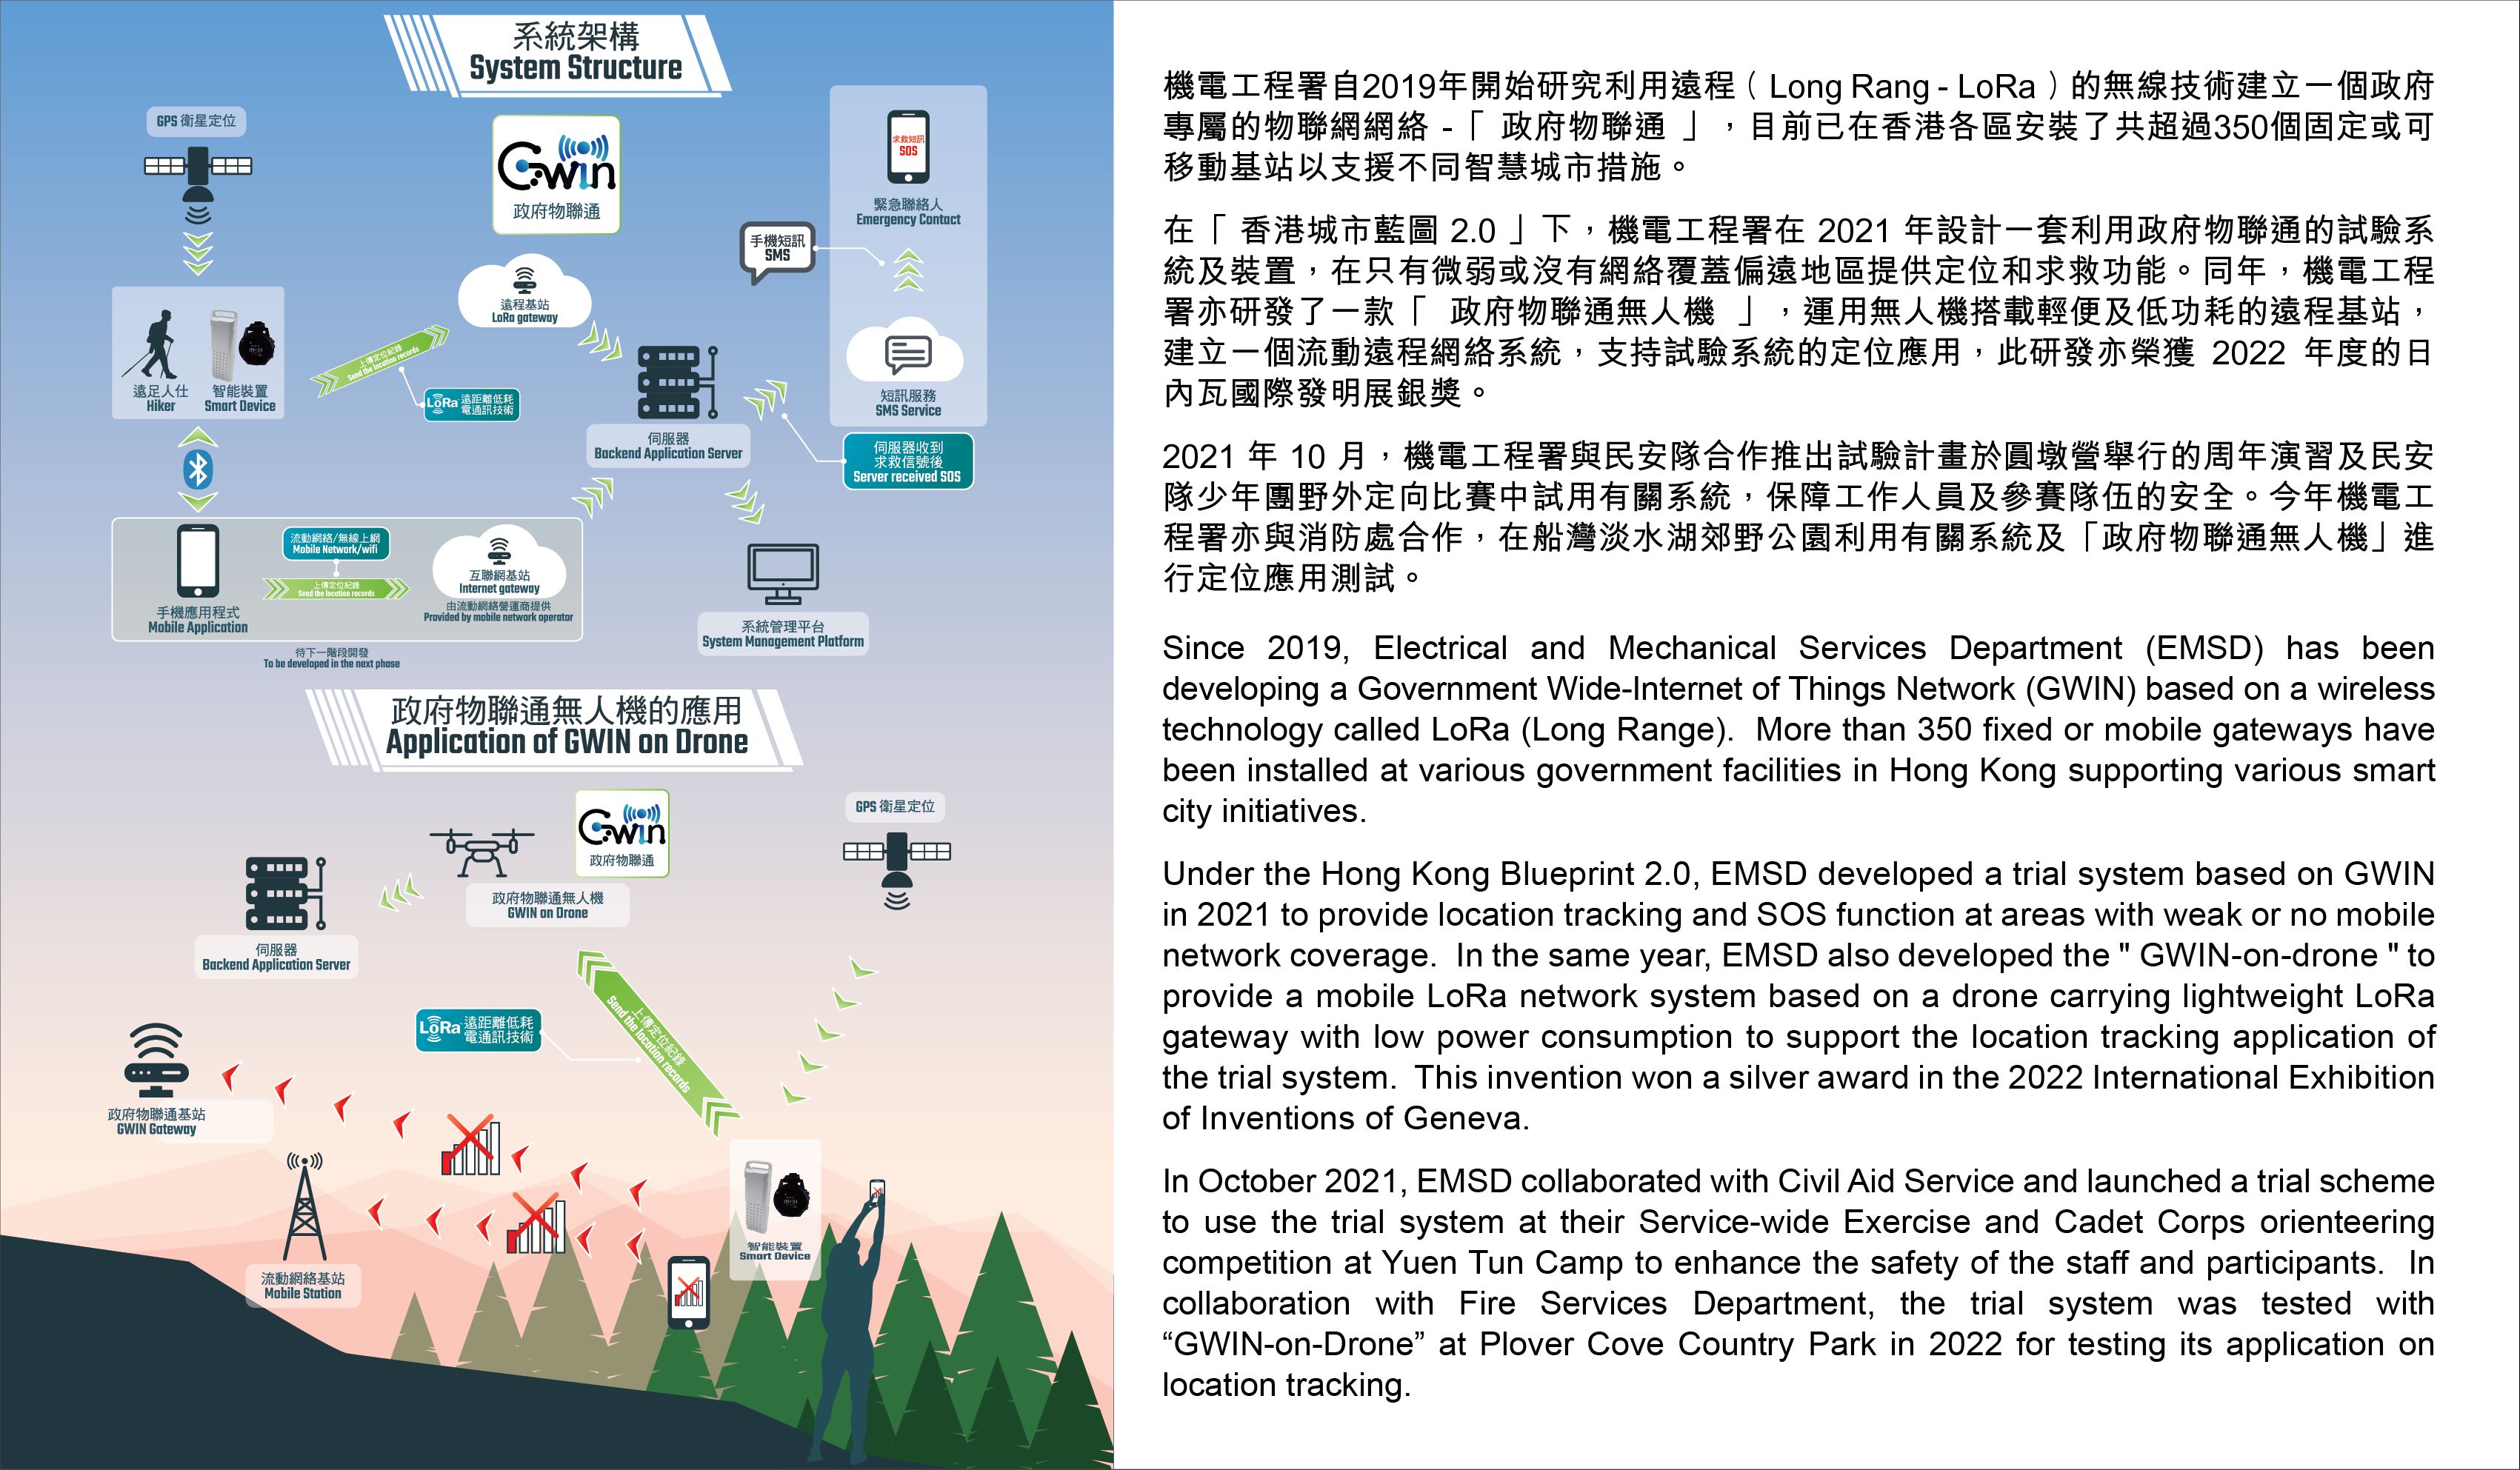 Hiker Safety System - Since 2019, Electrical and Mechanical Services Department (EMSD) has beendeveloping a Government Wide-Internet of Things Network (GWIN) based on a wireless technology called LoRa (Long Range).  More than 350 fixed or mobile gateways have been installed at various government facilities in Hong Kong supporting various smart city initiatives. Under the Hong Kong Blueprint 2.0, EMSD developed a trial system based on GWIN in 2021 to provide location tracking and SOS function at areas with weak or no mobile network coverage.  In the same year, EMSD also developed the " GWIN-on-drone " to provide a mobile LoRa network system based on a drone carrying lightweight LoRa gateway with low power consumption to support the location tracking application of the trial system.  This invention won a silver award in the 2022 International Exhibition of Inventions of Geneva. In October 2021, EMSD collaborated with Civil Aid Service and launched a trial scheme to use the trial system at their Service-wide Exercise and Cadet Corps orienteering competition at Yuen Tun Camp to enhance the safety of the staff and participants.  In collaboration with Fire Services Department, the trial system was tested with “GWIN-on-Drone” at Plover Cove Country Park in 2022 for testing its application onlocation tracking.